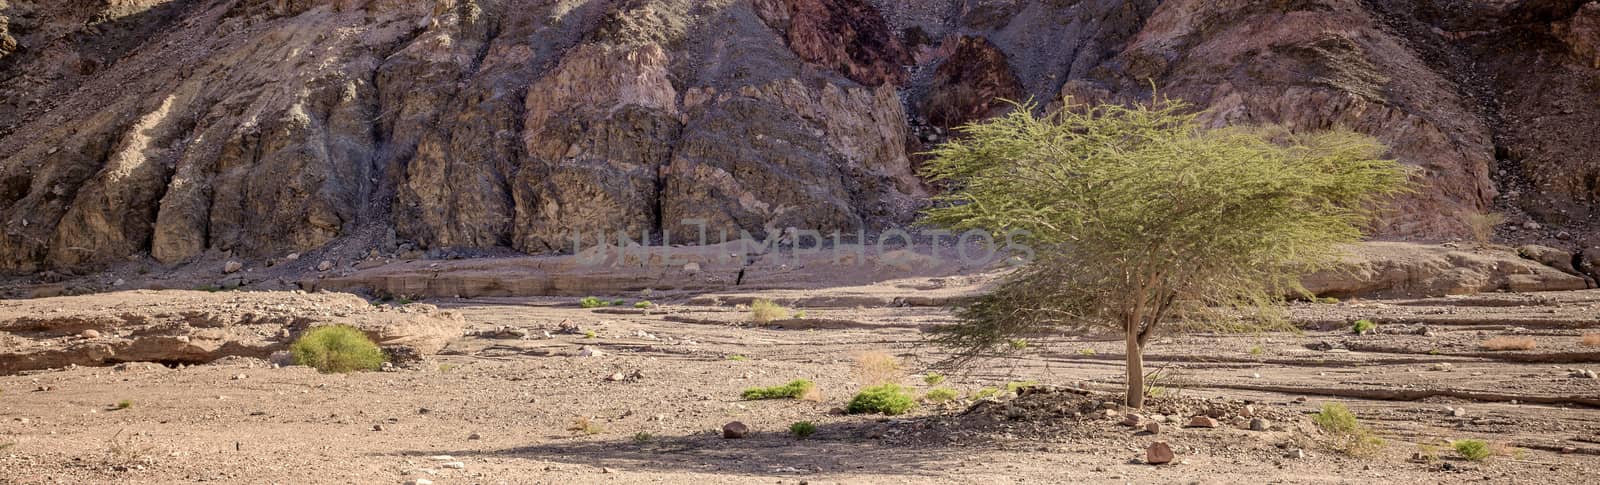 panorama of single green tree in the desert of south israel ner the red canion